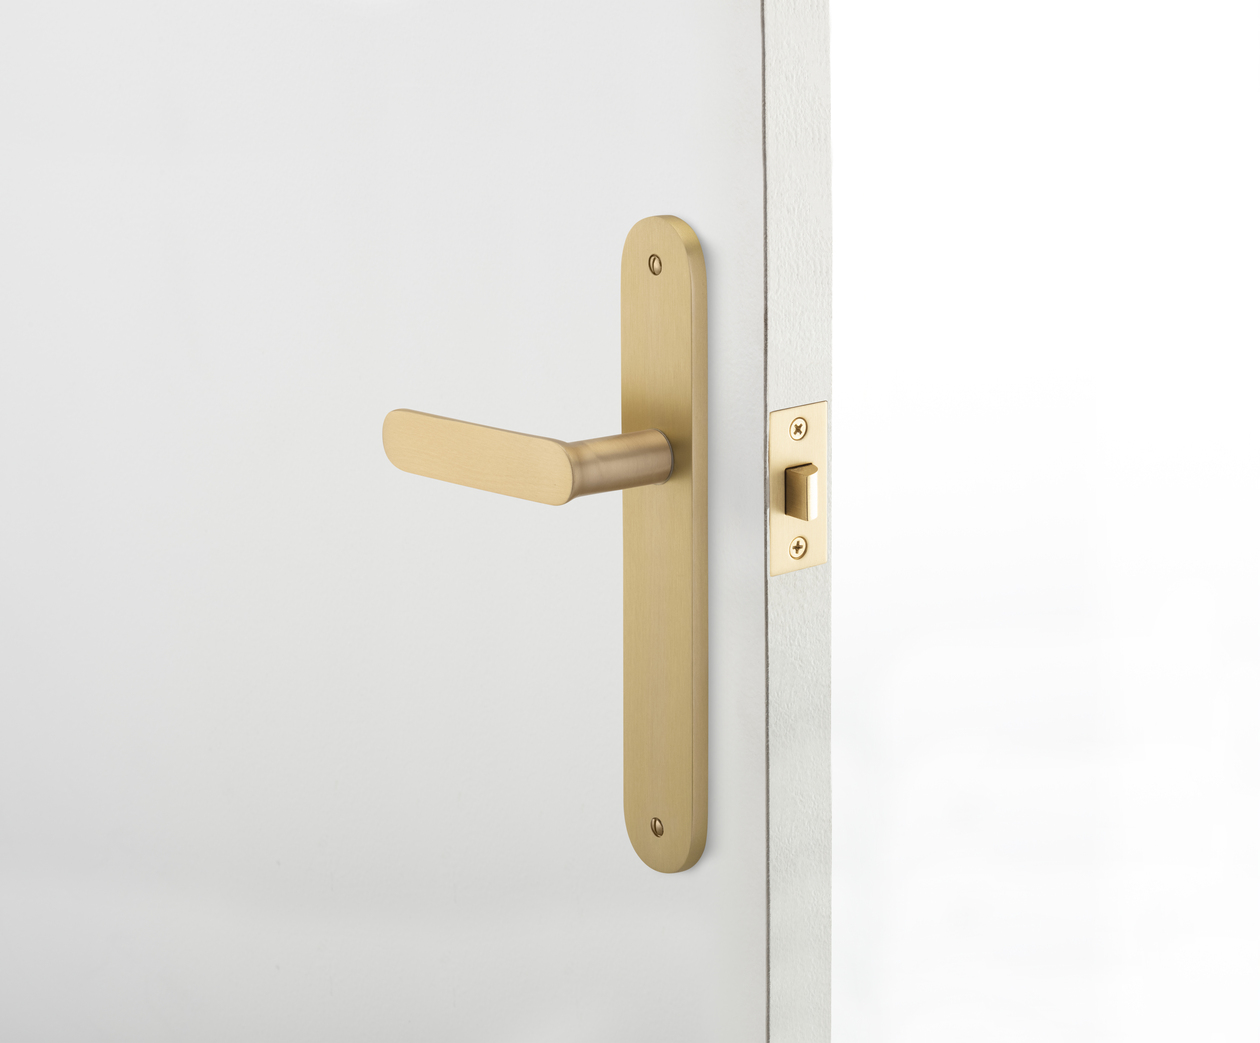 15264 - Bronte Lever - Oval Backplate - Brushed Brass - Passage